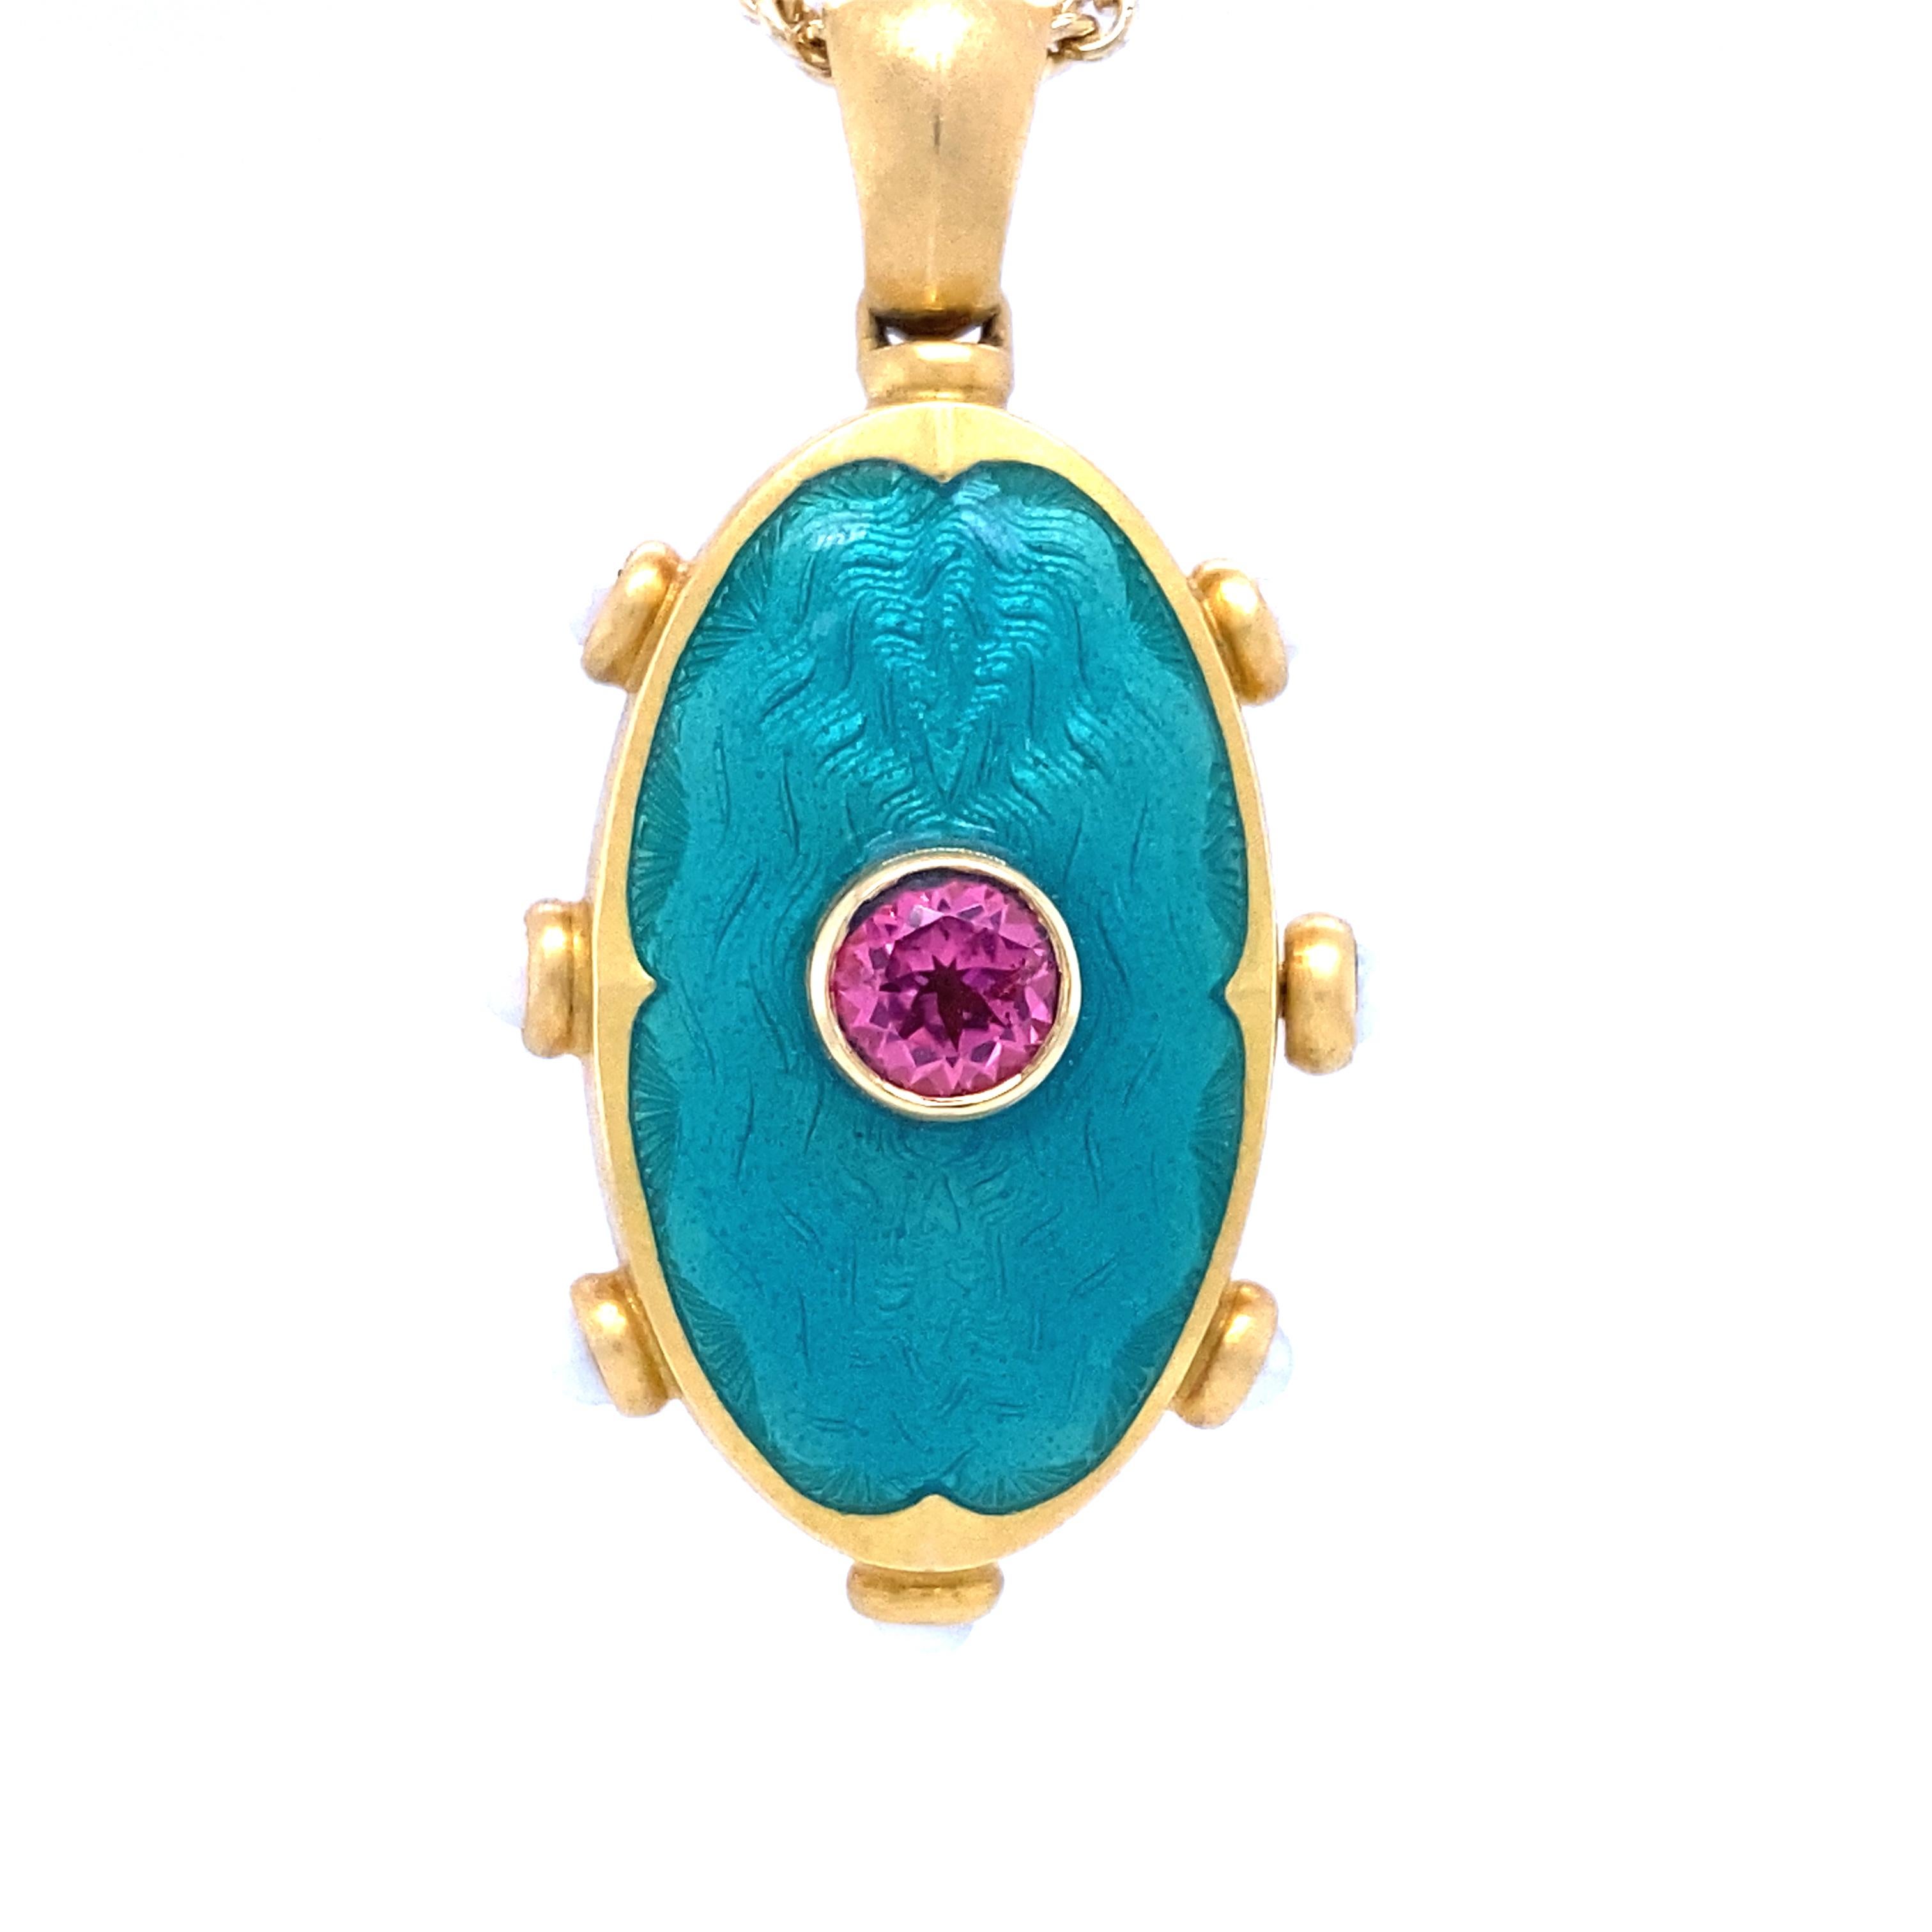 Victor Mayer oval locket pendant 18k yellow gold, matt finish, Romance Collection, translucent turquoise vitreous enamel, guilloche, 1 rubellite (pink tourmaline), 7 akoya pearls, measurements app. 40.0 mm x 20.0 mm

About the creator Victor